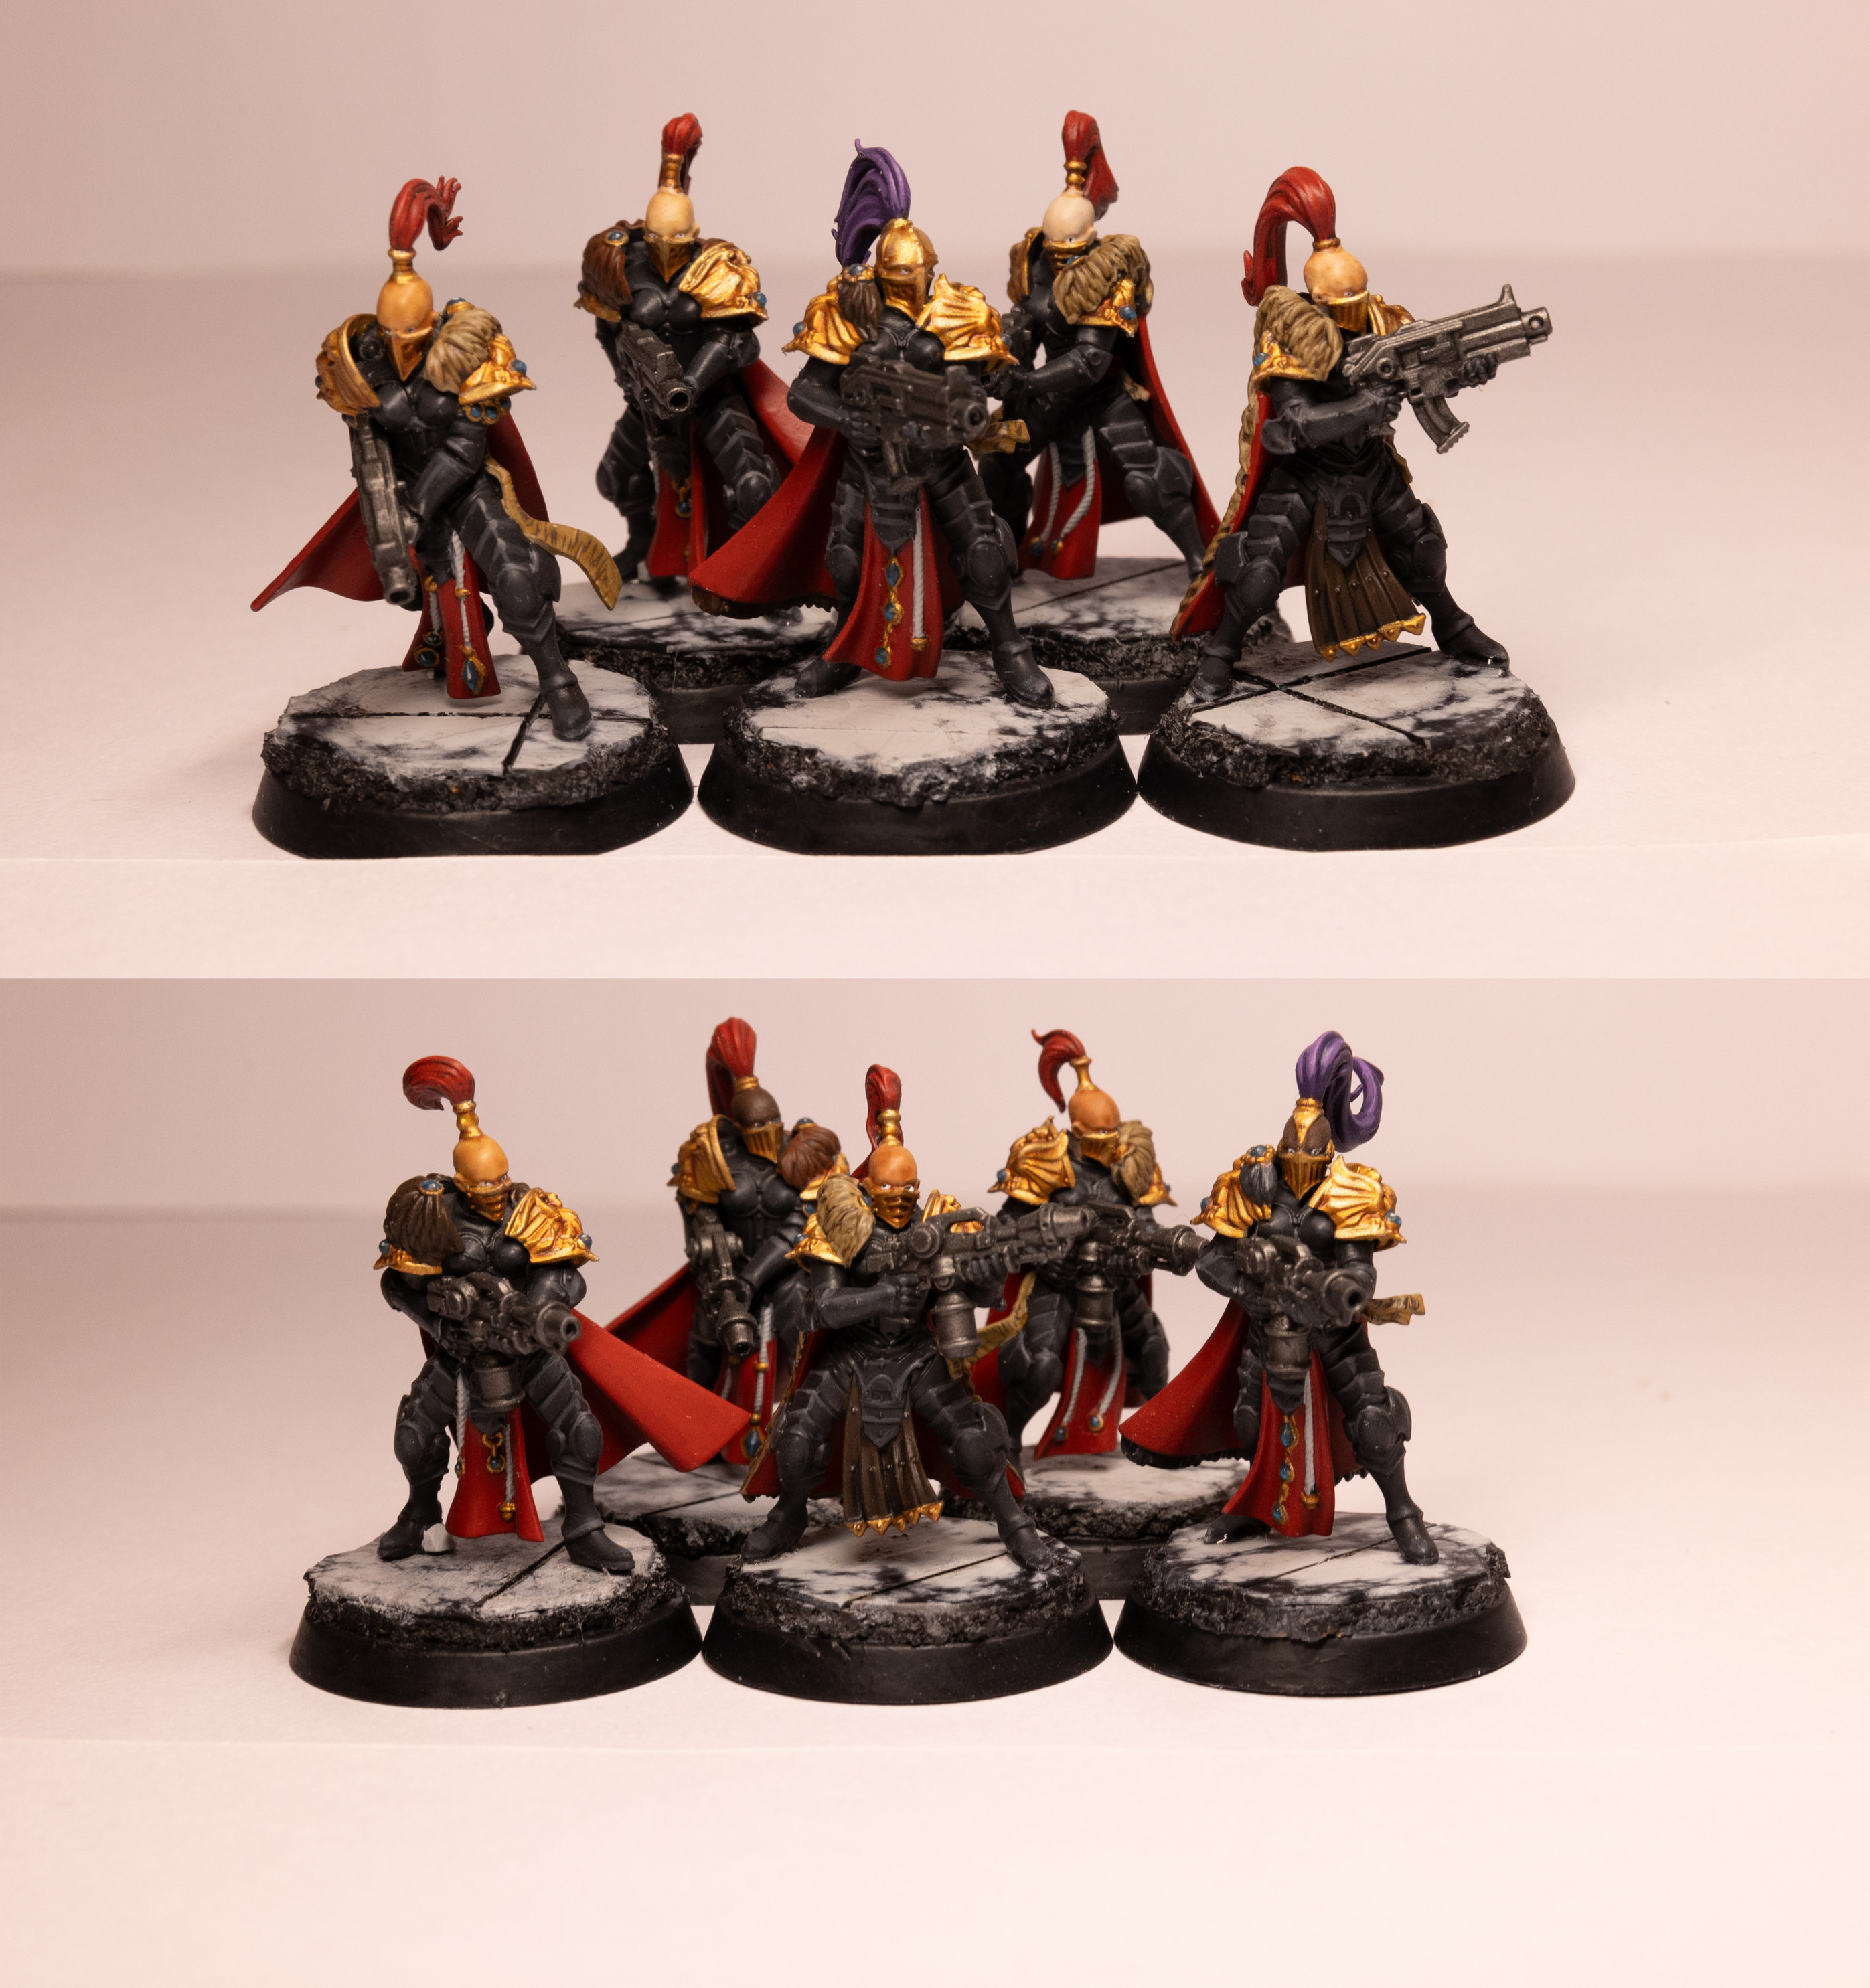 Ten Warhammer 40k Sisters of Silence in Shadowkeepers colour scheme. They are female warriors in black armour with gold trim and red capes/plumes. They are bald bar a long plume of hair in a top knot held in place with gold jewellery. Two of the plumes are purple. The are all stood on black and while, marble-like bases